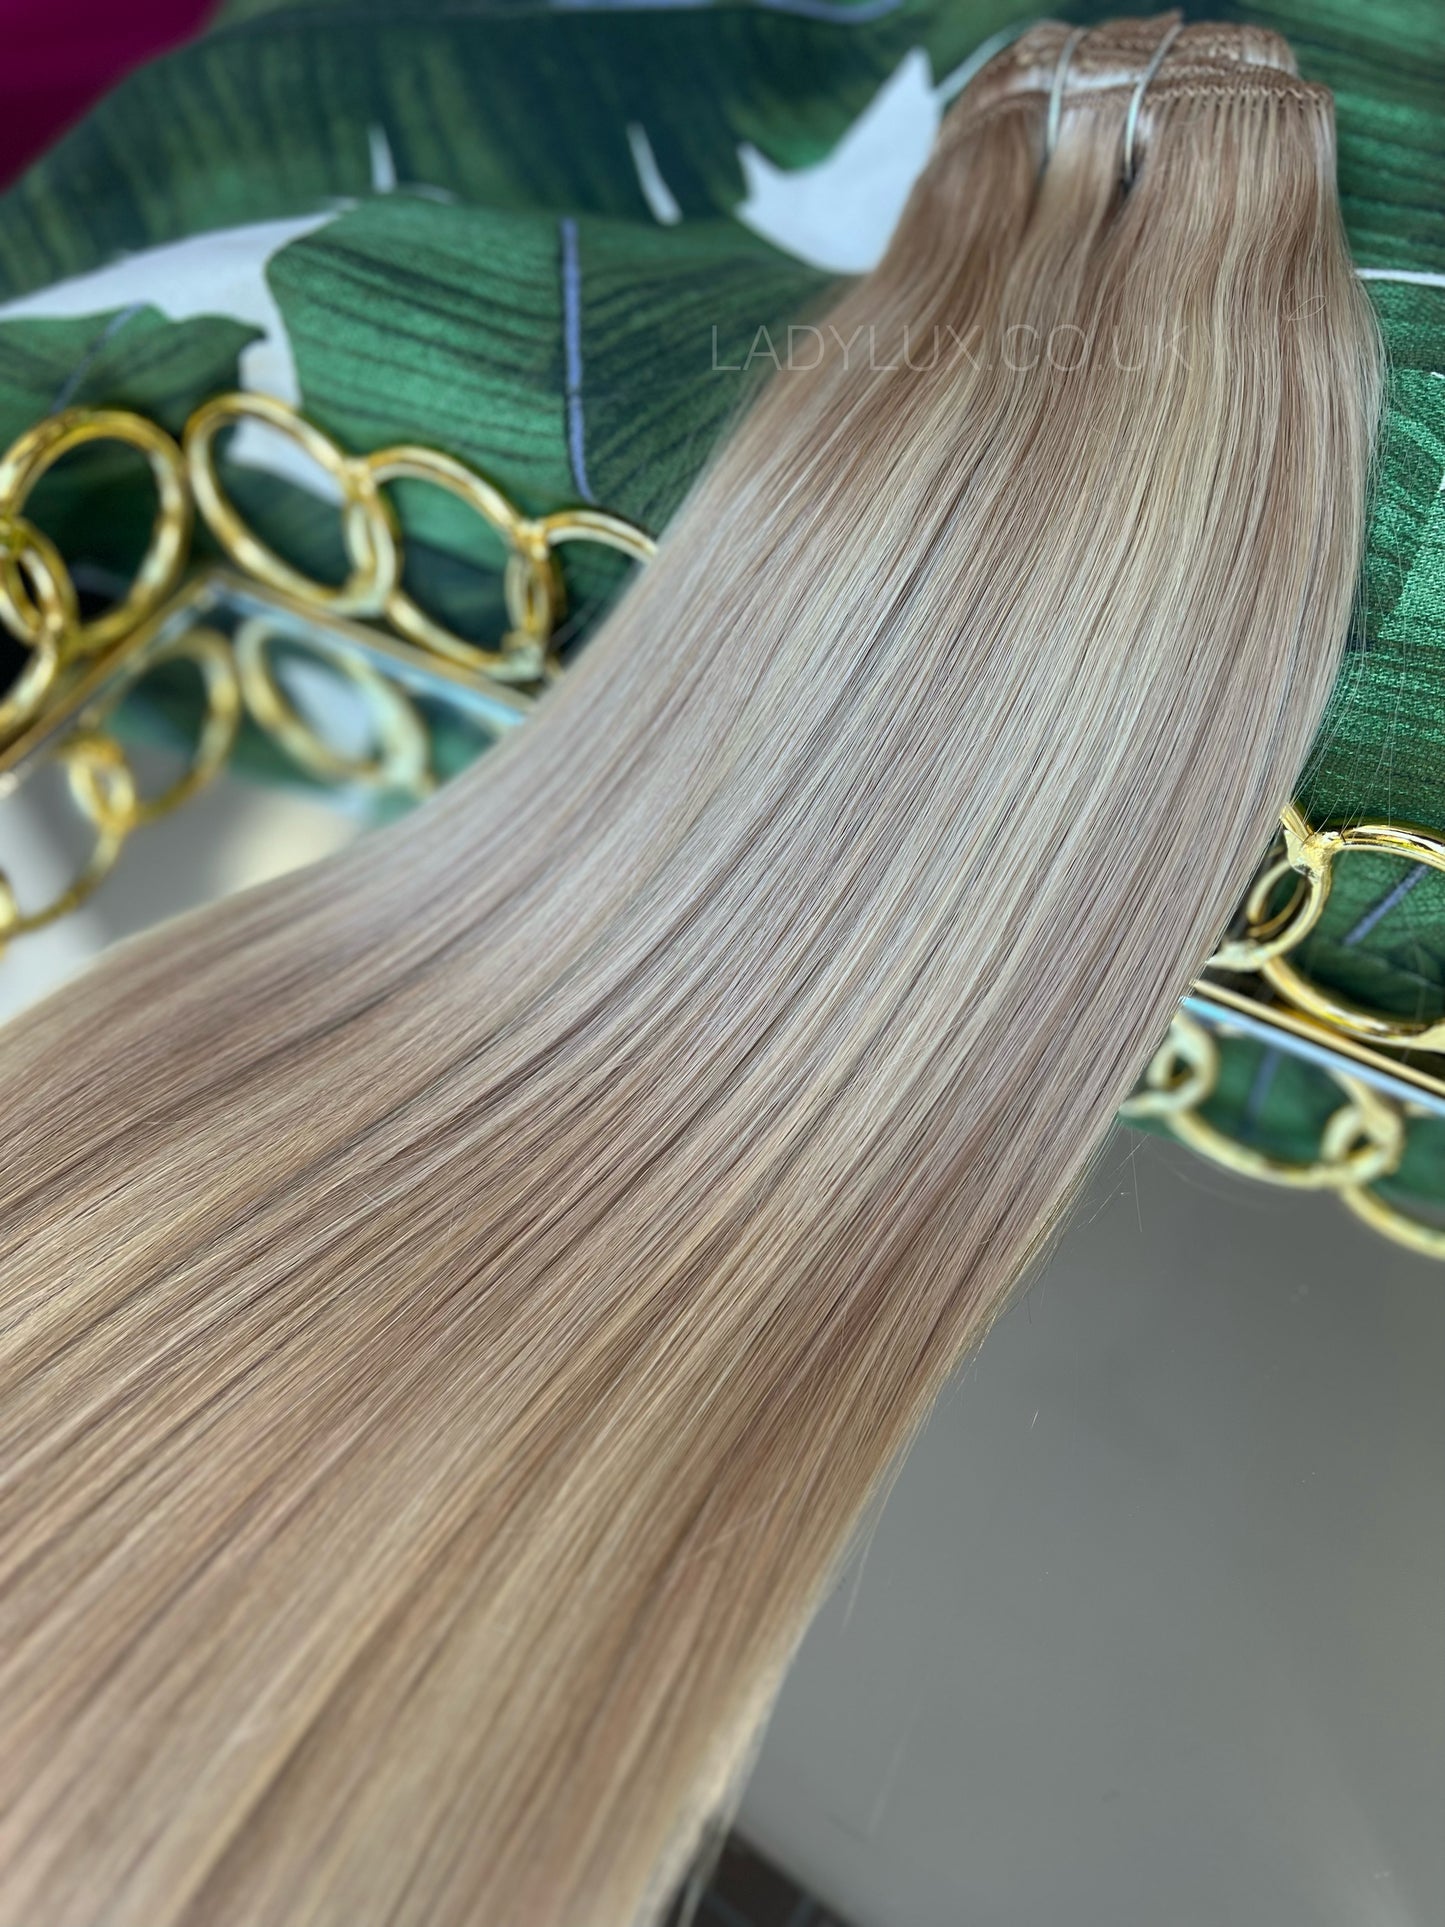 16” Deluxe 150g Human Hair - Natural Latte Blonde - Ladylux